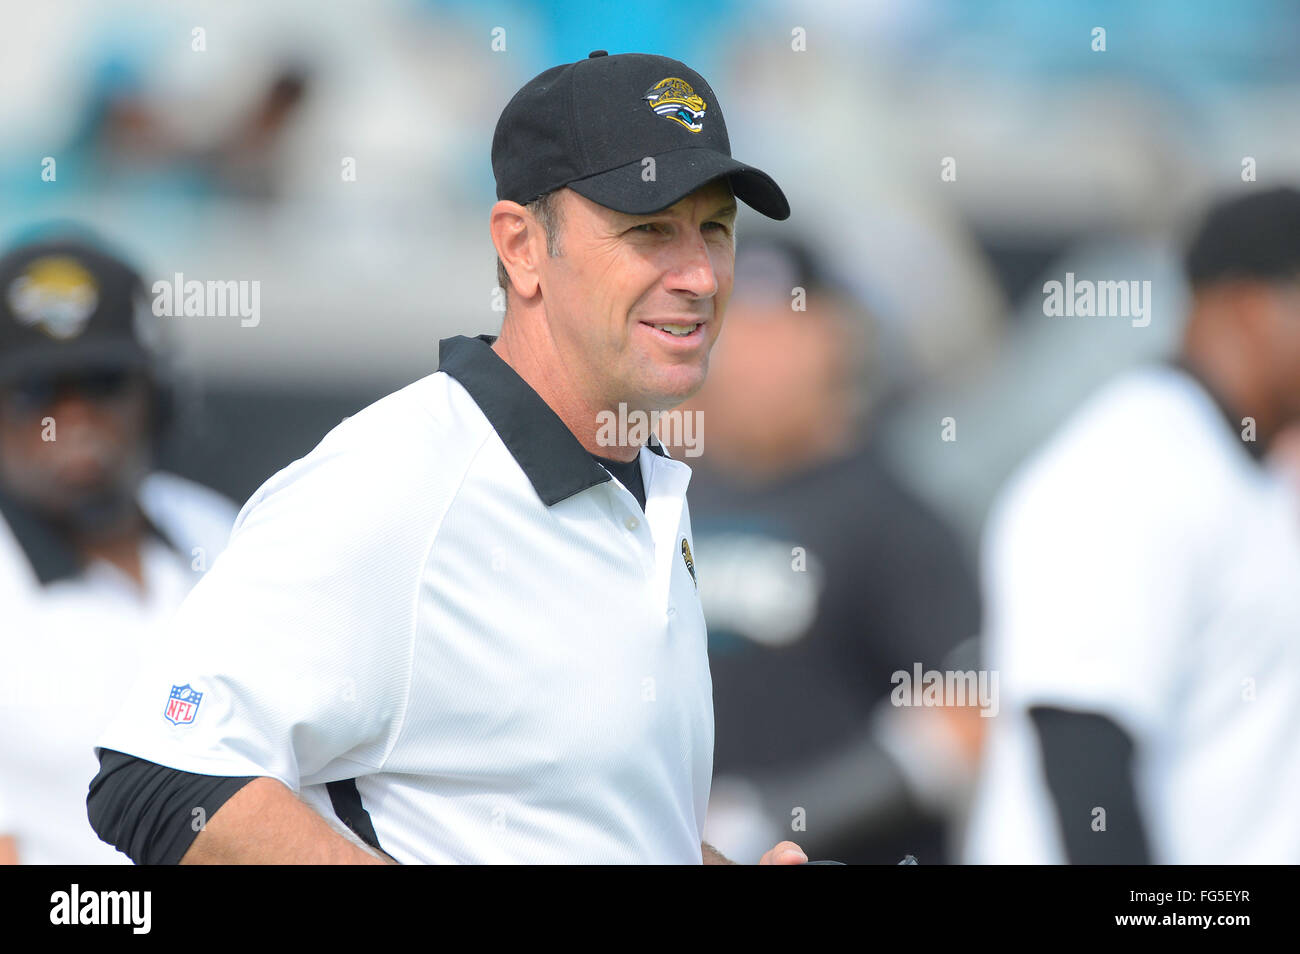 Jacksonville, FL, USA. 9th Dec, 2012. Jacksonville Jaguars head coach Mike Mularkey during an NFL game against the New York Jets at EverBank Field on Dec 9, 2012 in Jacksonville, Florida. The Jets won 17-10.ZUMA Press/Scott A. Miller. © Scott A. Miller/ZUMA Wire/Alamy Live News Stock Photo